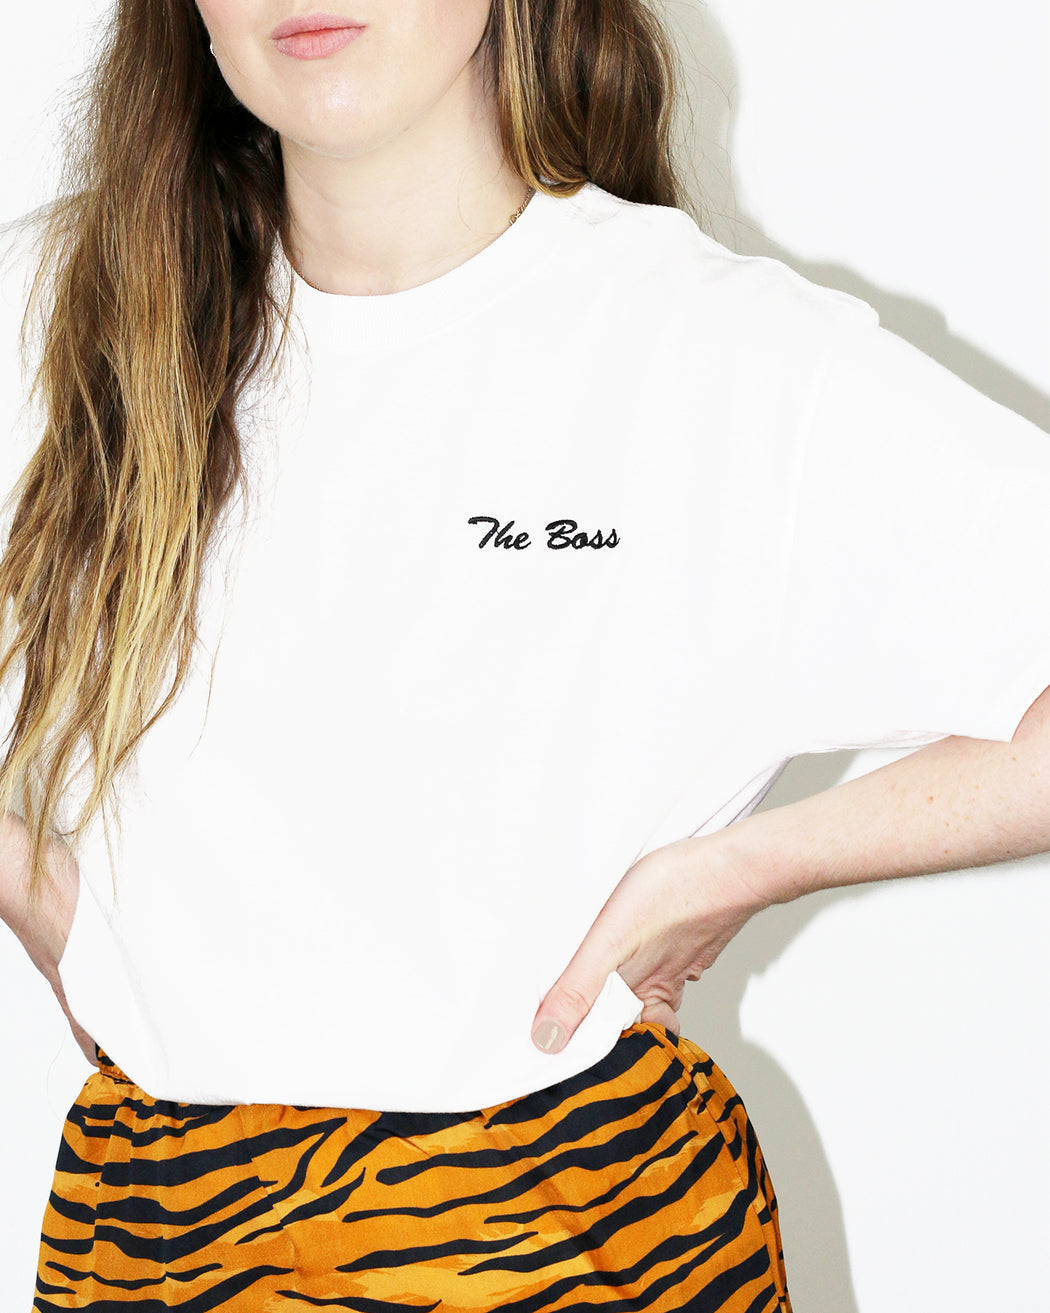 Double Trouble Gang:The Boss Tee – Black on White Embroidery,ANOMIE